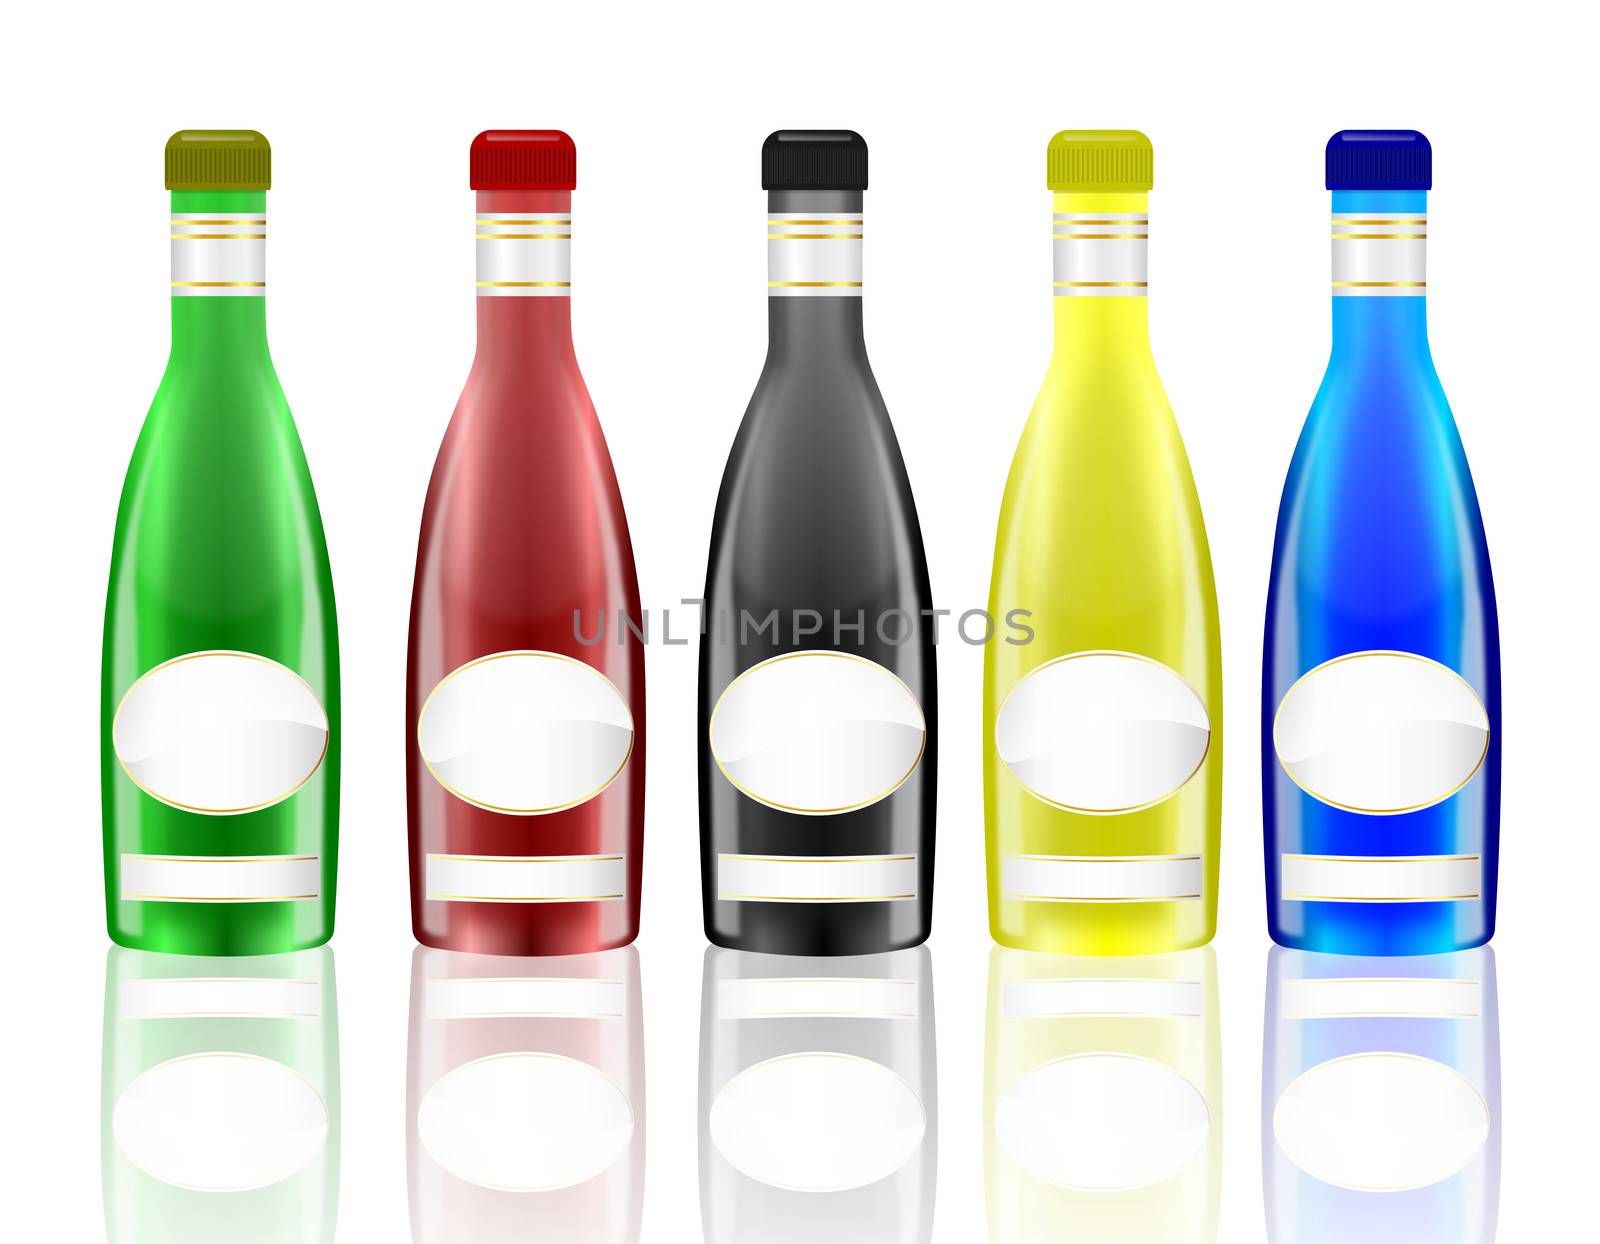 Shiny Glass Bottles with Blank Labels by RichieThakur